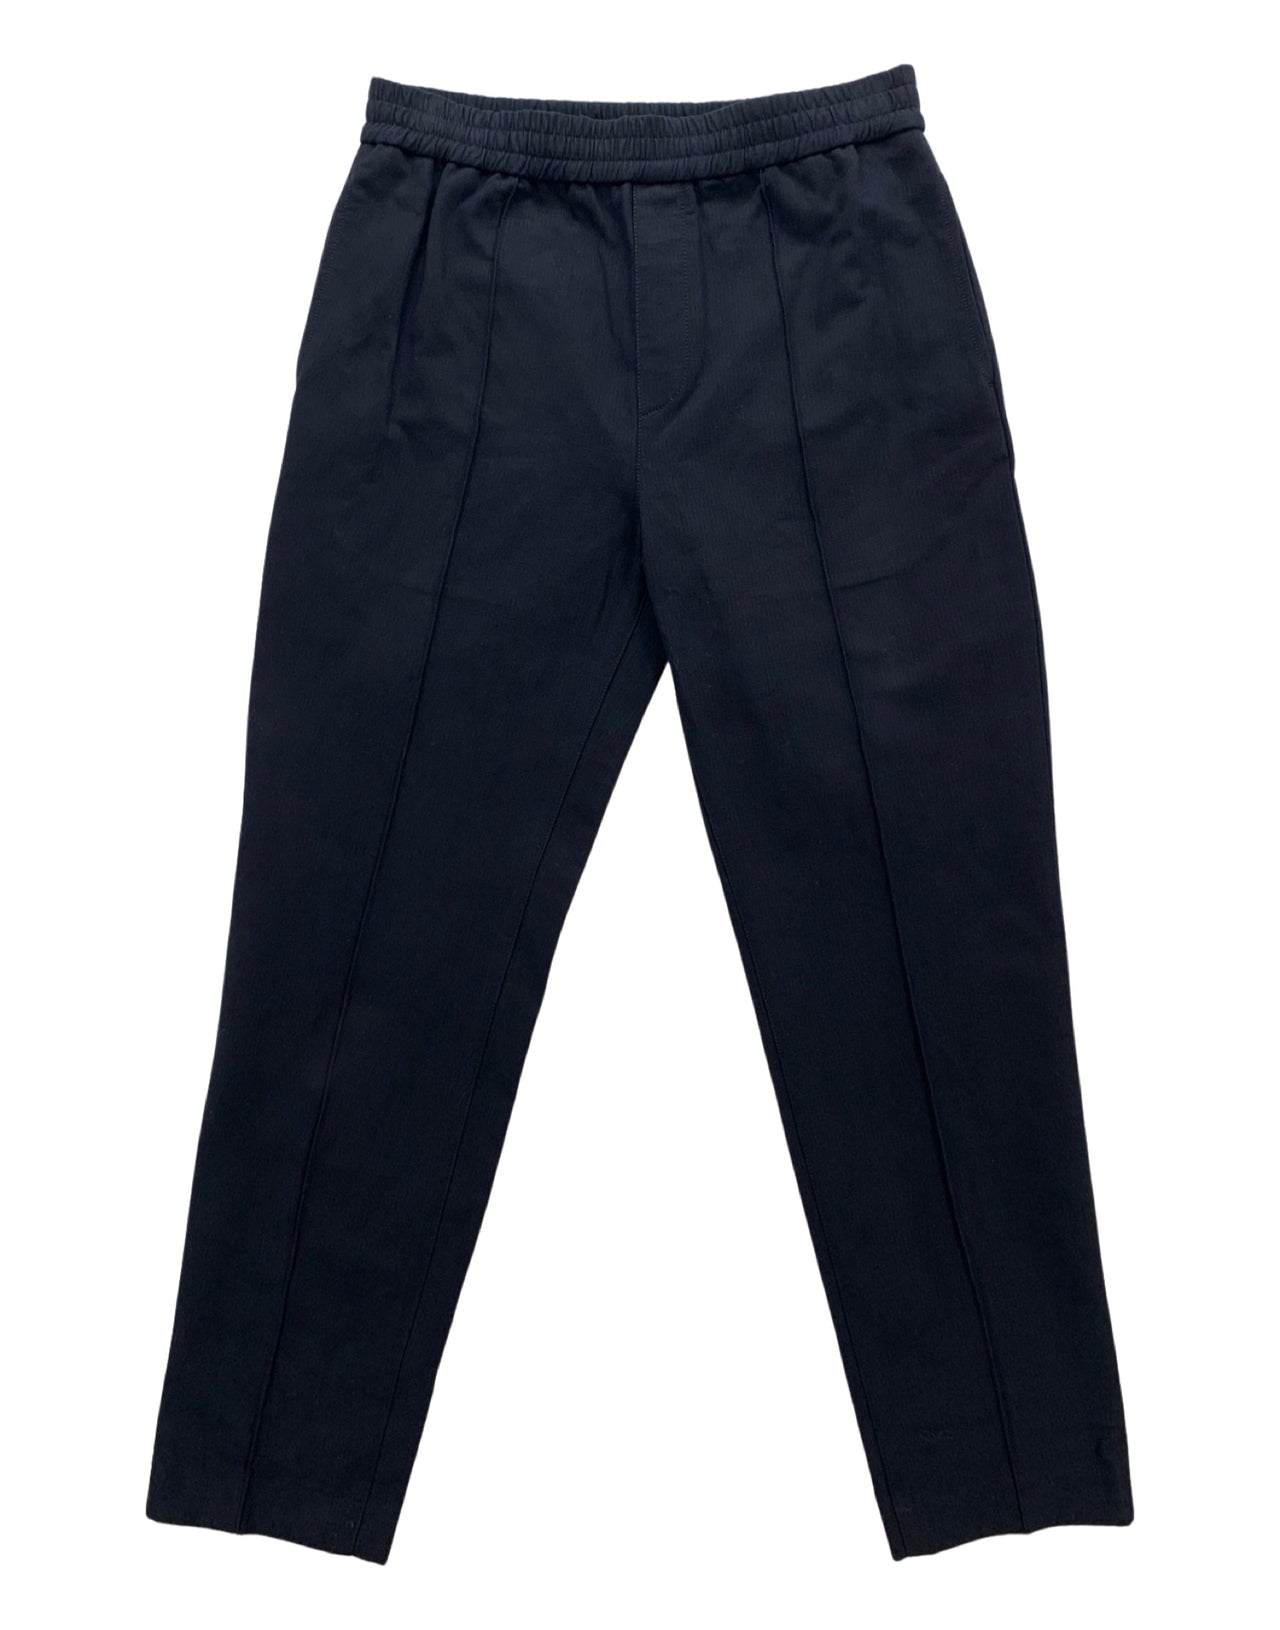 A.P.C. Pantalone over cotone organico coulisse blu navy